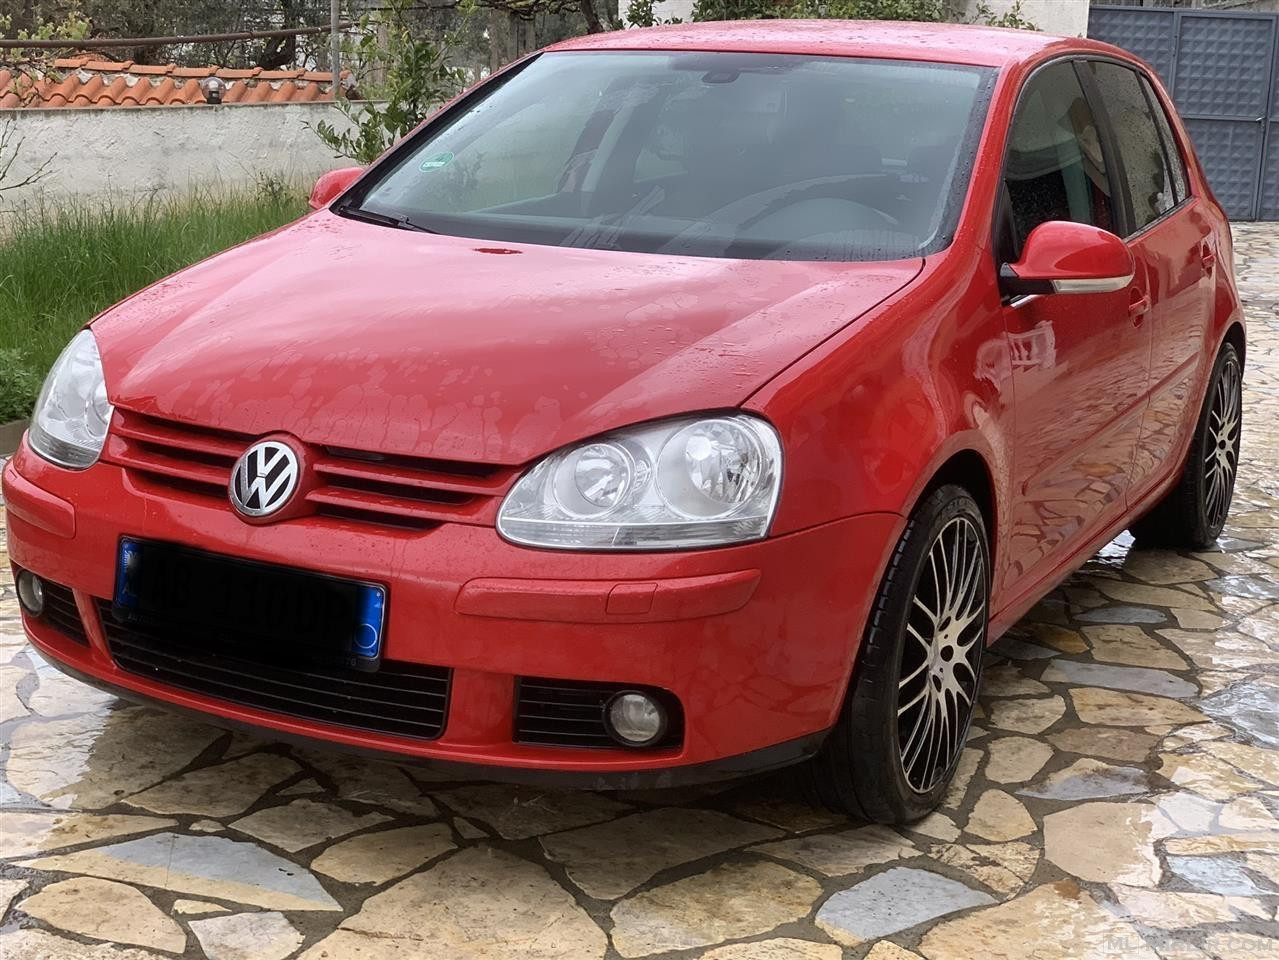 Golf 5 1.4 Tsi 2008 Automat 4999 Euro disk full opsion 